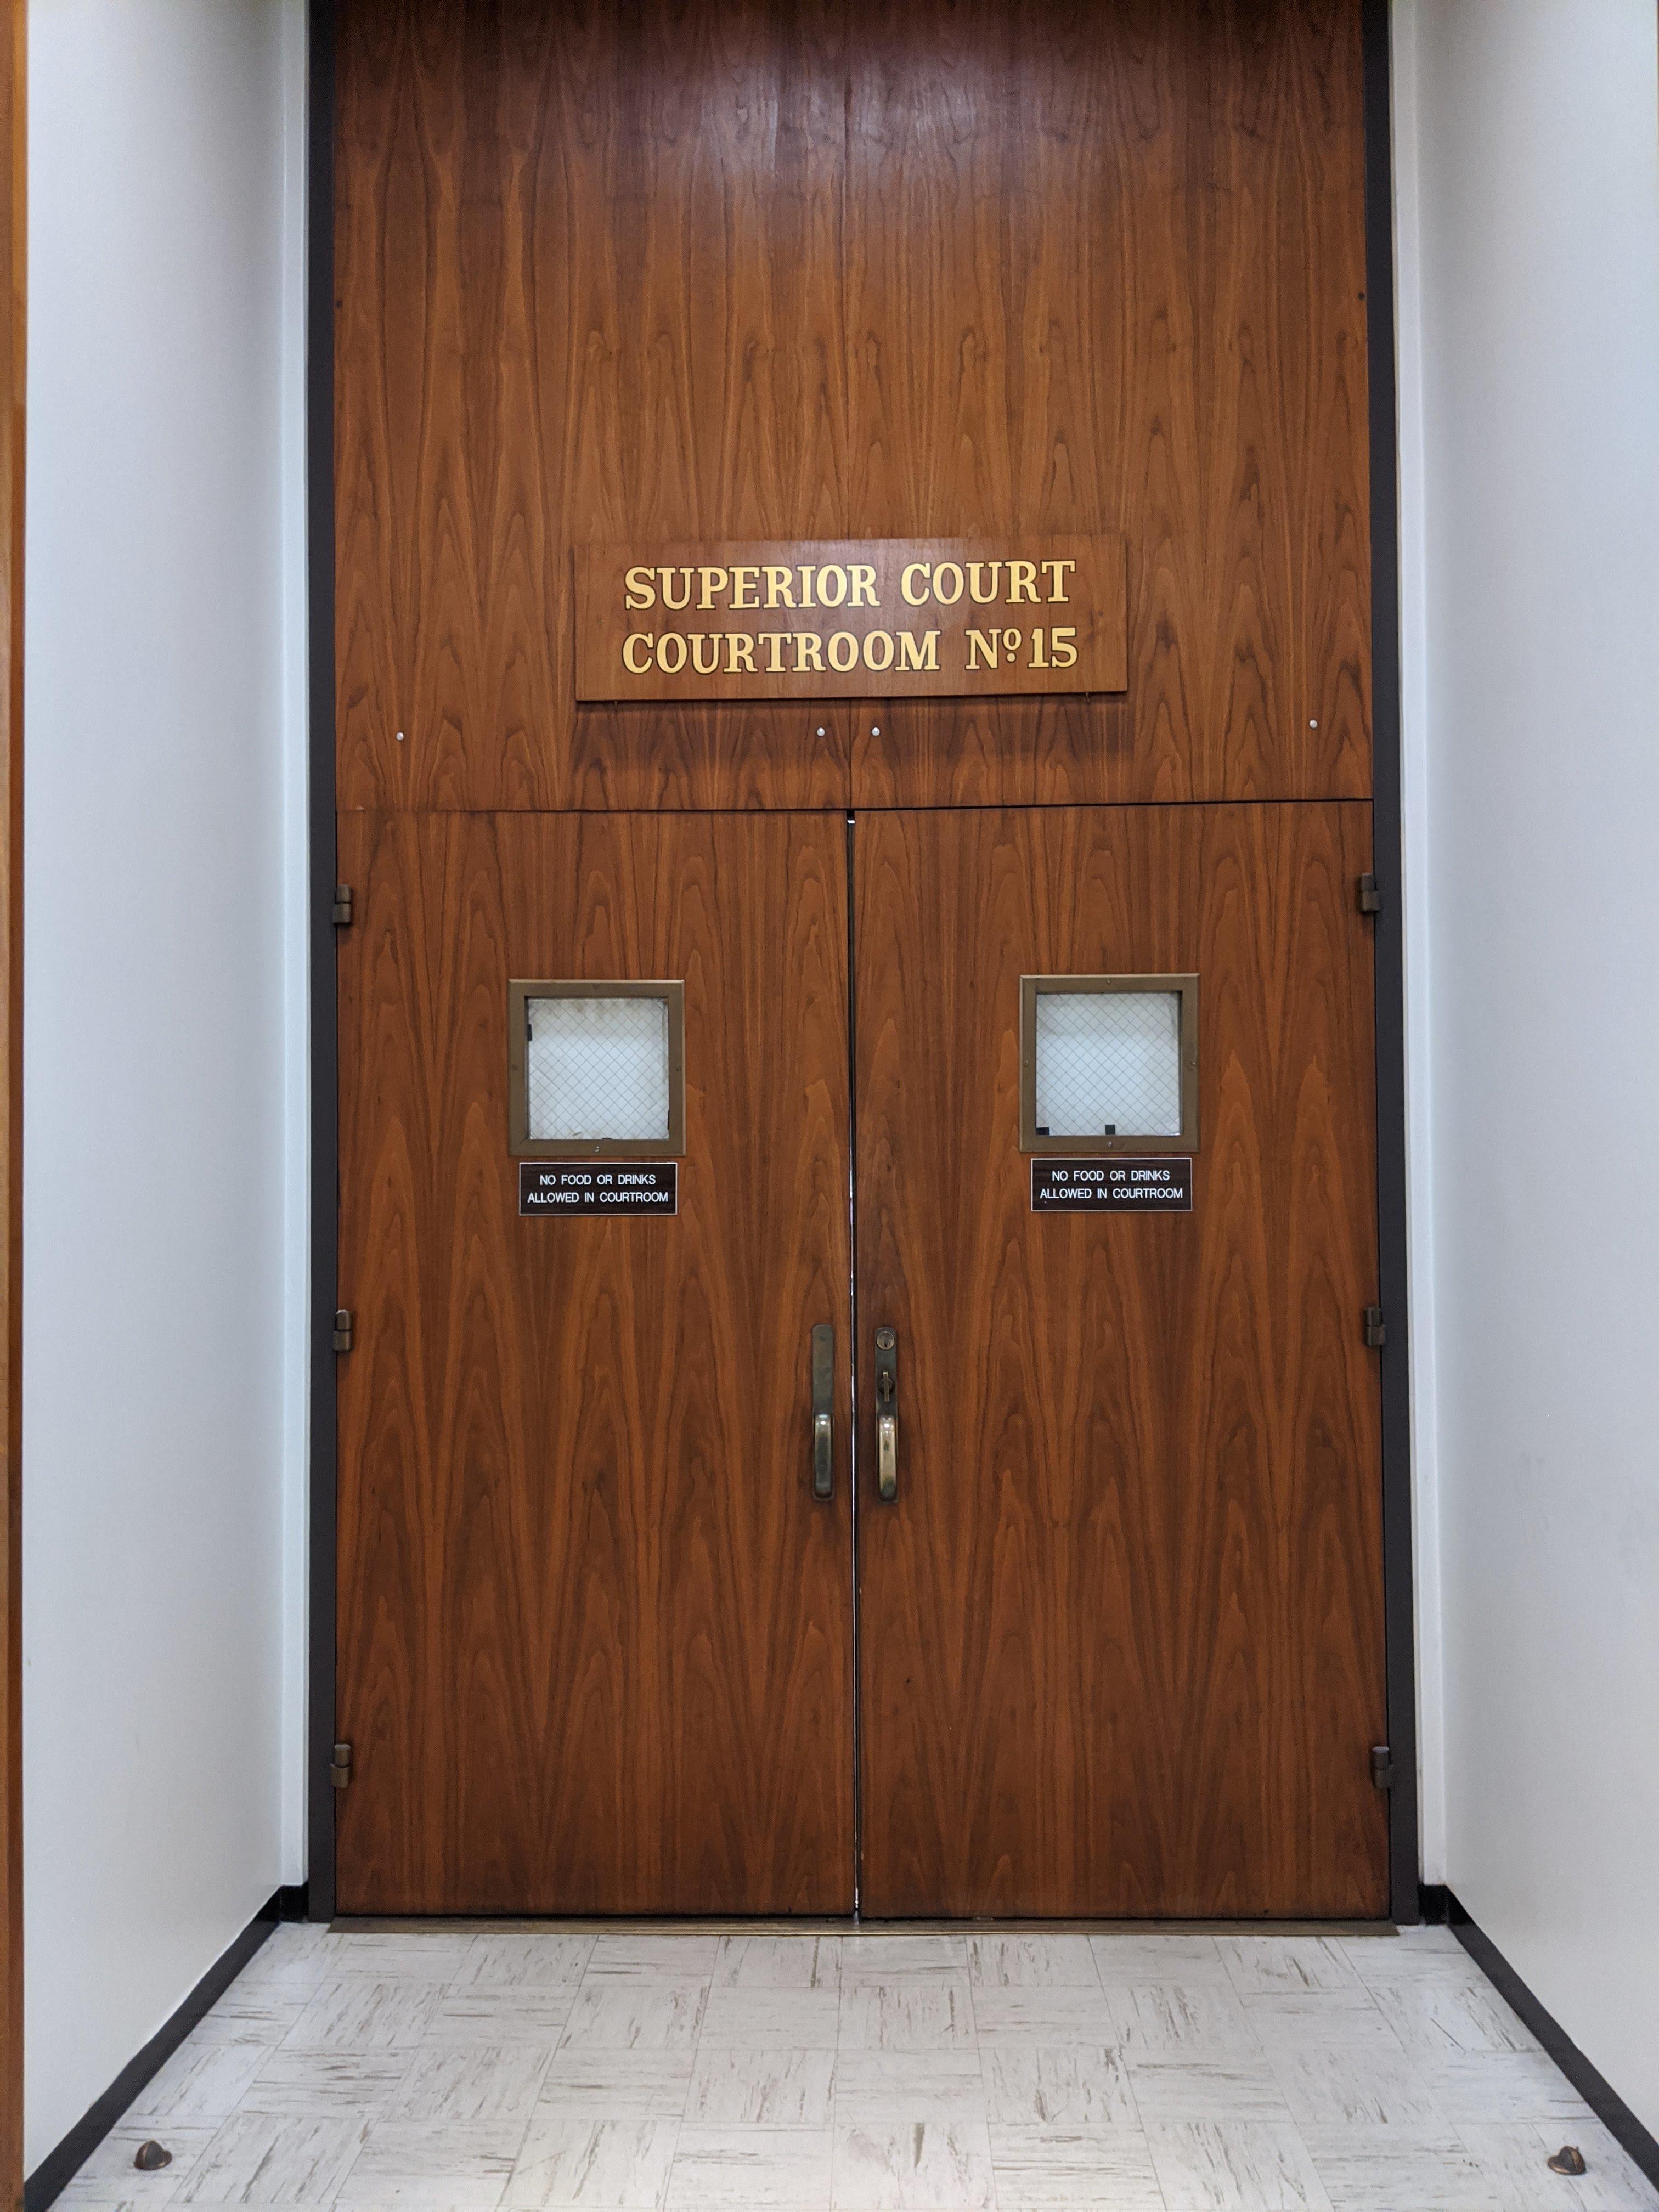 Santa Clara Small Claims Court Hearings Are Held in Courtroom No. 14 and 15